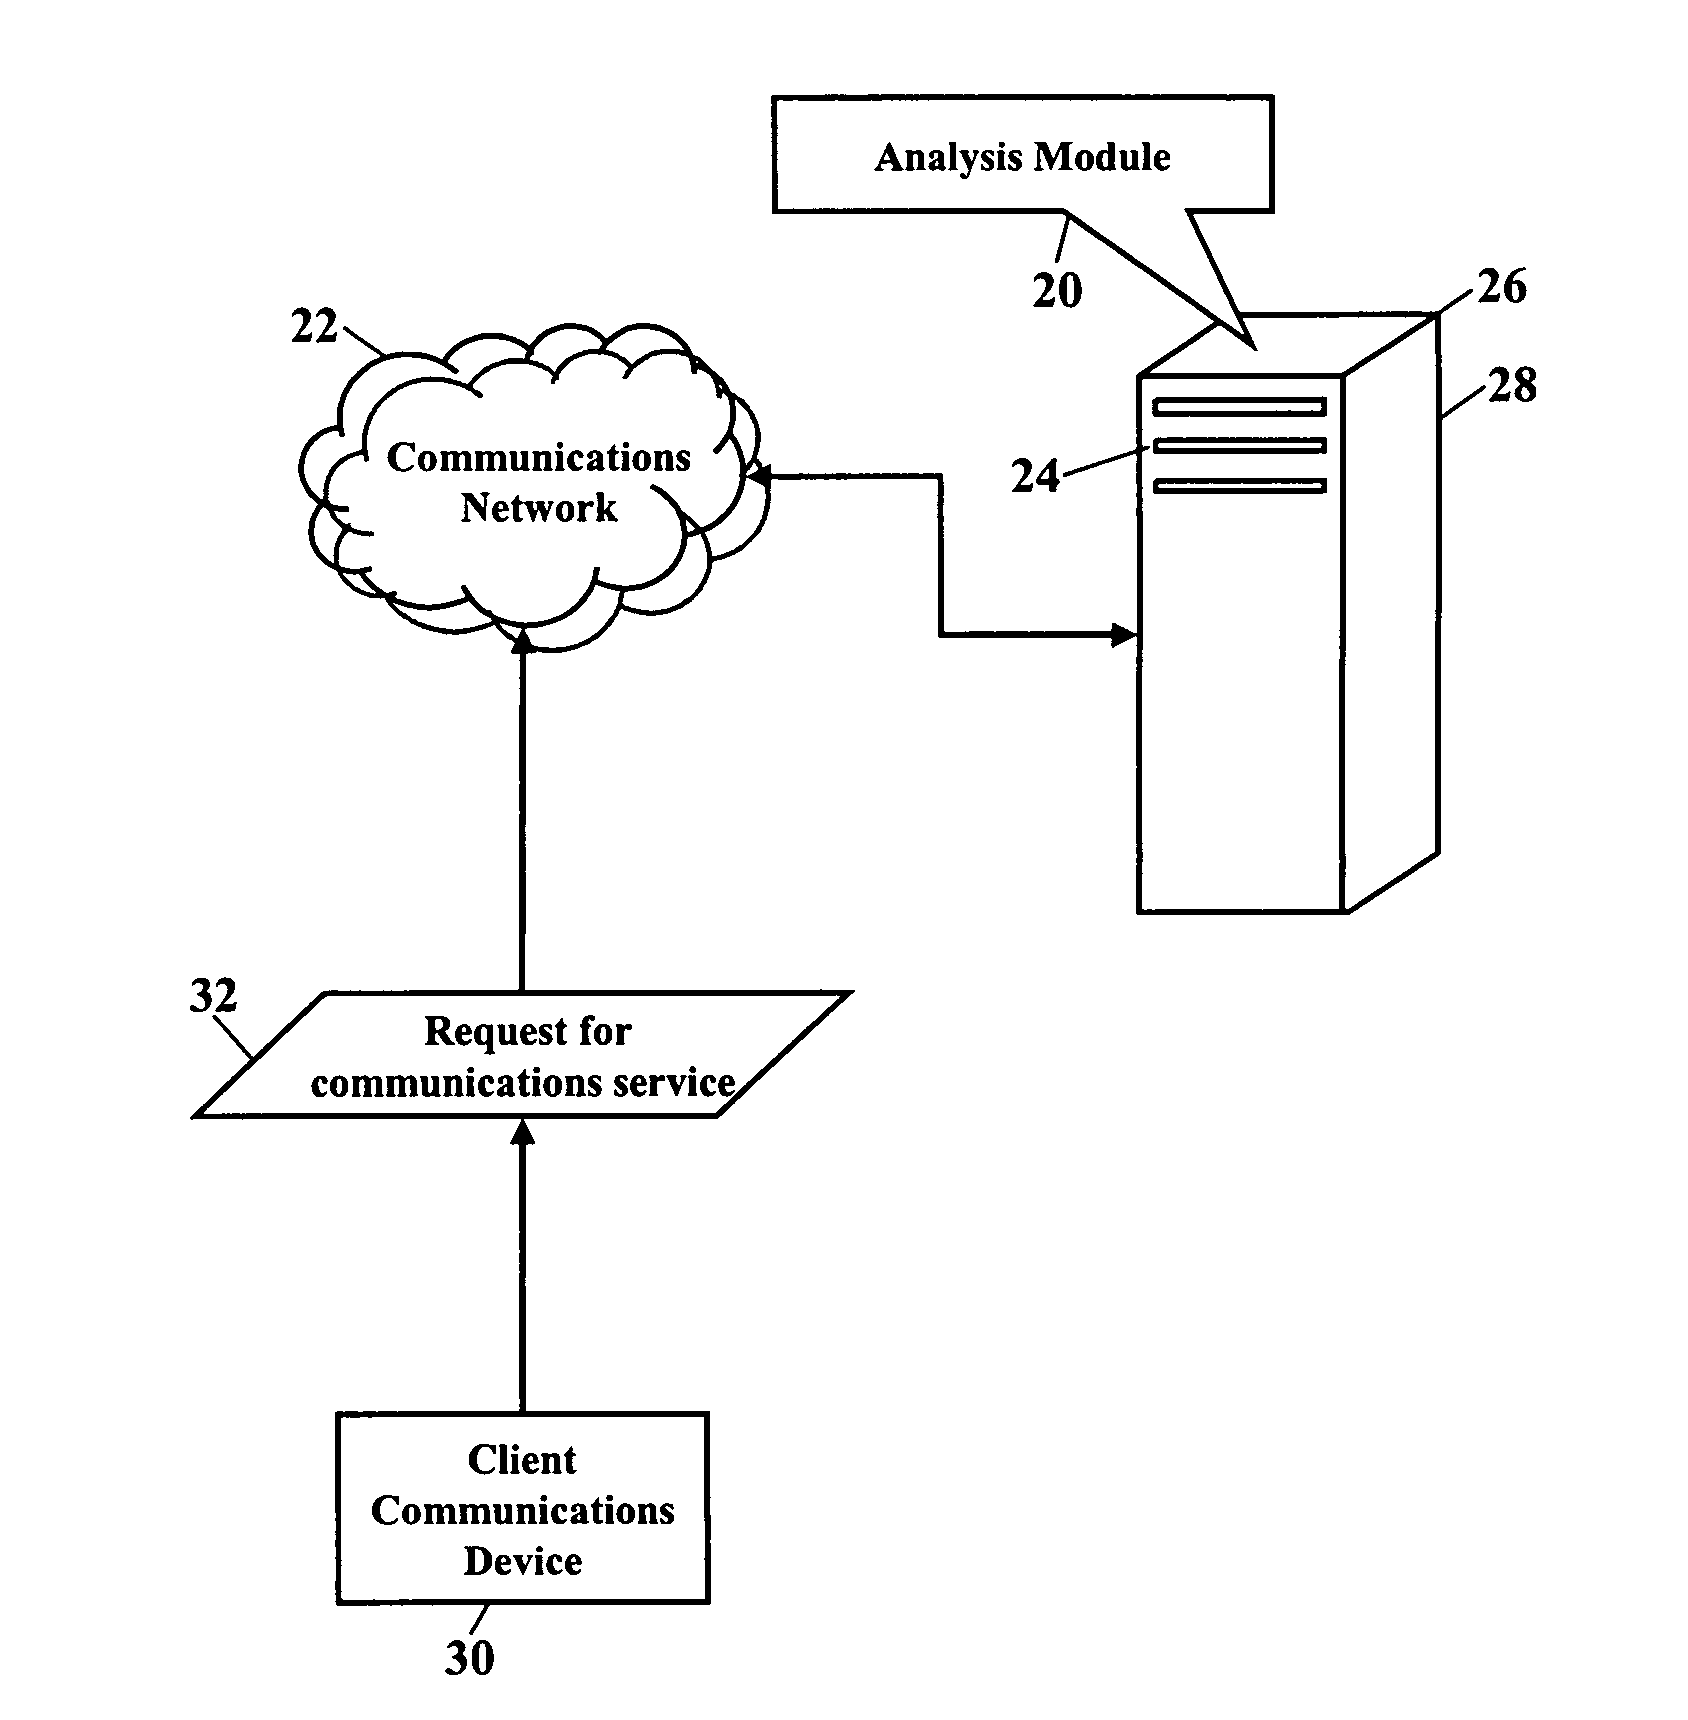 Methods for providing communications services